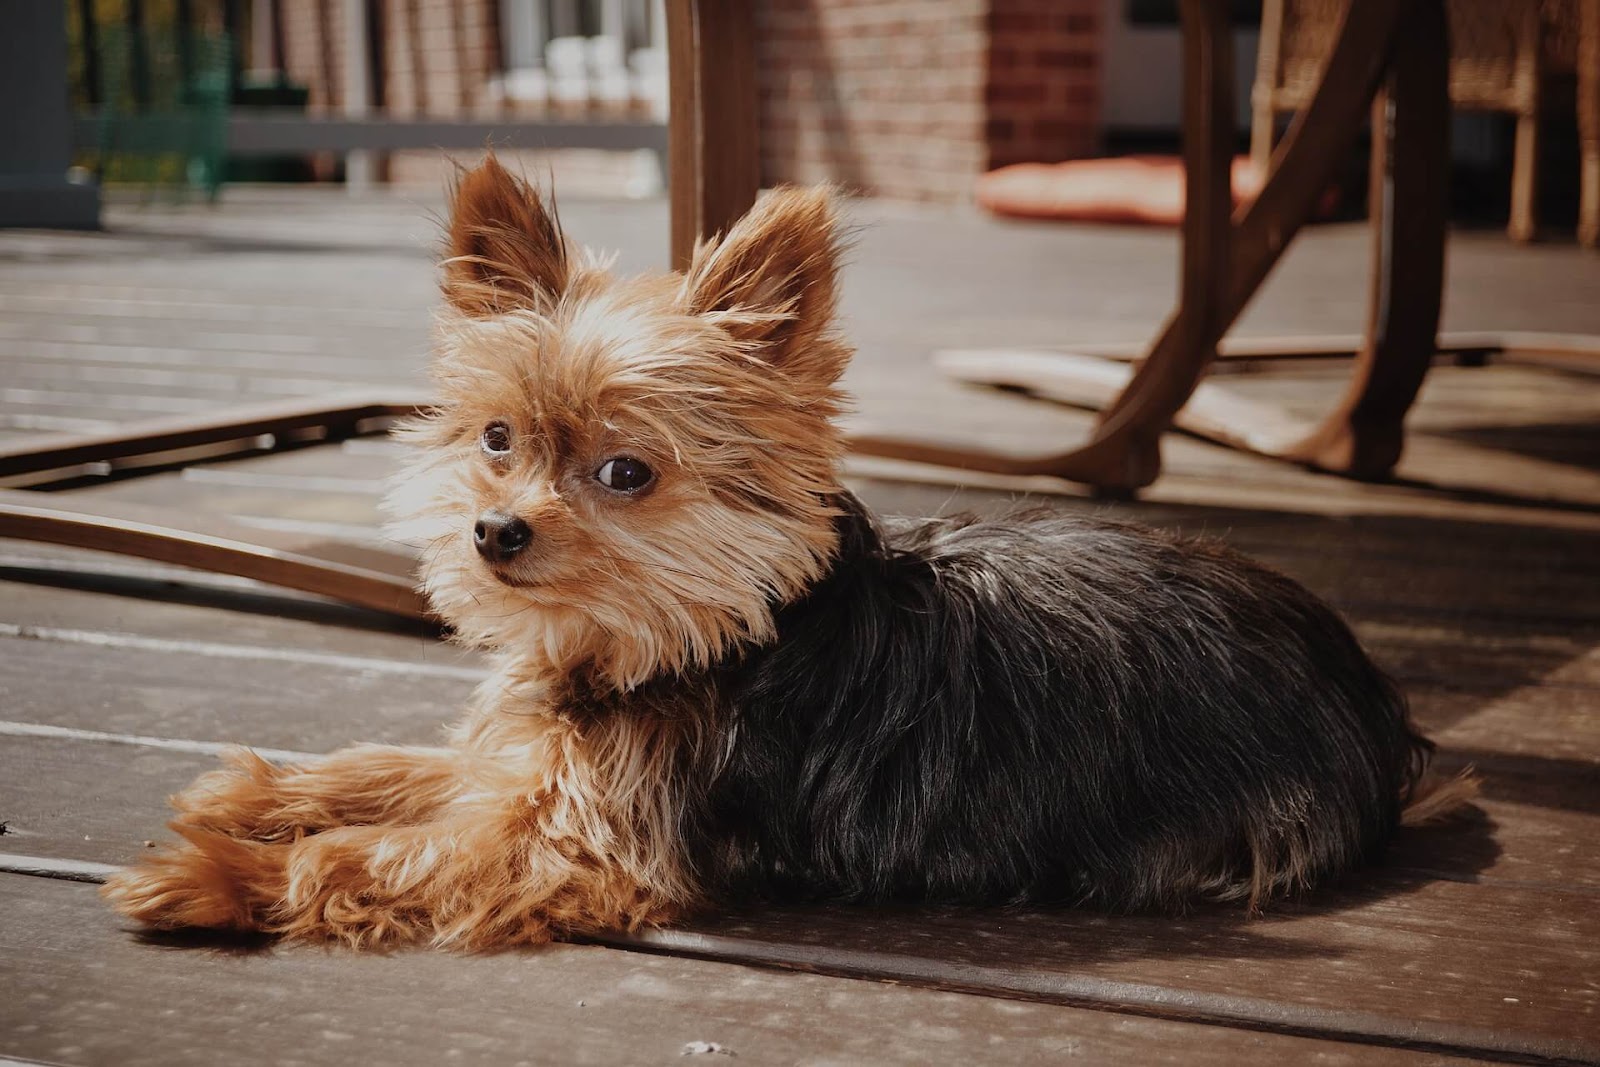 How To Get Rid Of Fleas On A Yorkie?